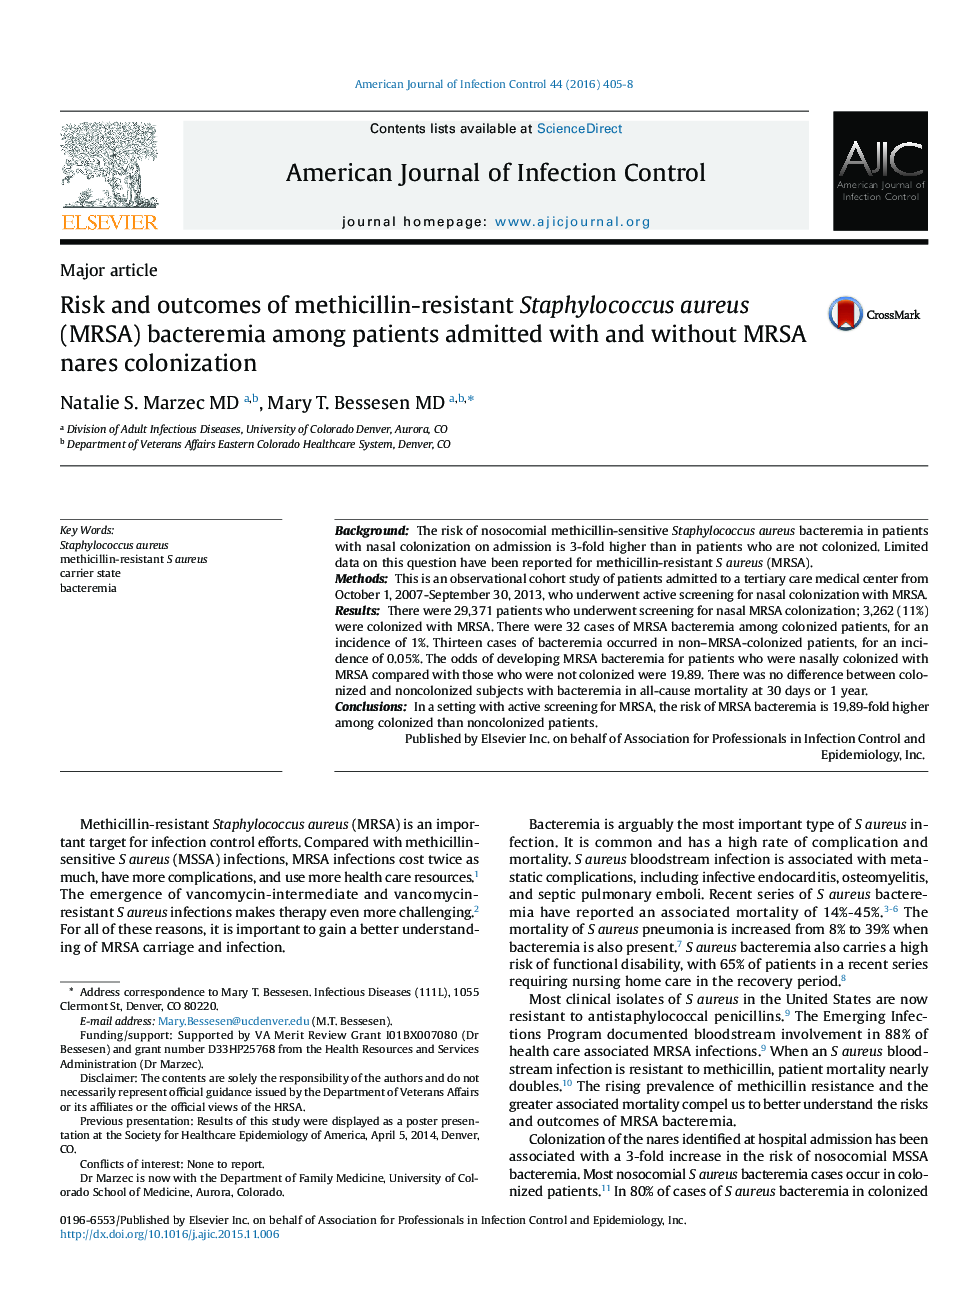 Risk and outcomes of methicillin-resistant Staphylococcus aureus (MRSA) bacteremia among patients admitted with and without MRSA nares colonization